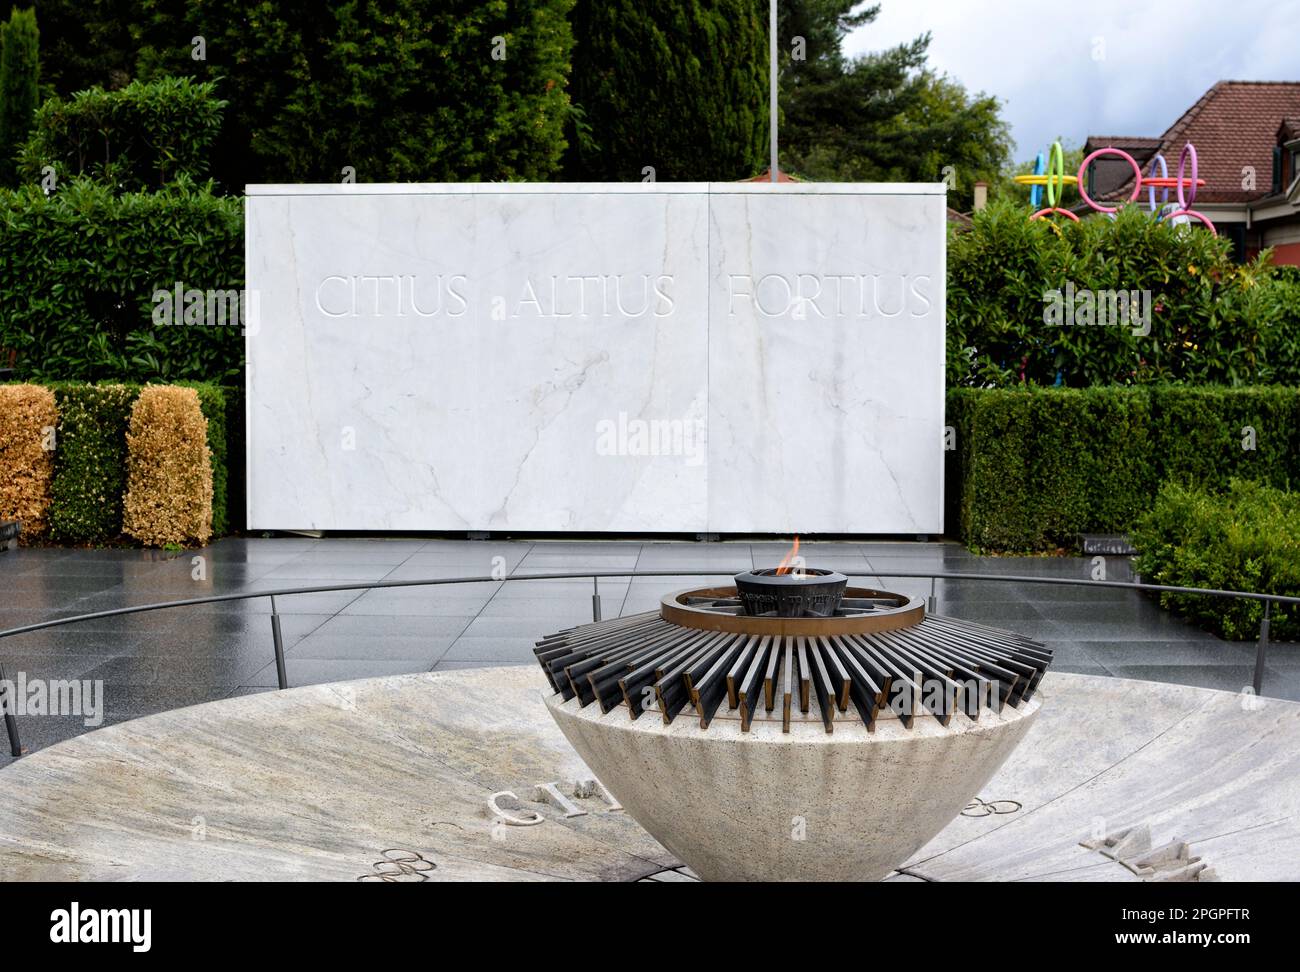 LAUSANNE, SWITZERLAND - JULY 5, 2014: Torch at the Olympic Museum, with sign reading Faster, Higher, Stronger. Stock Photo